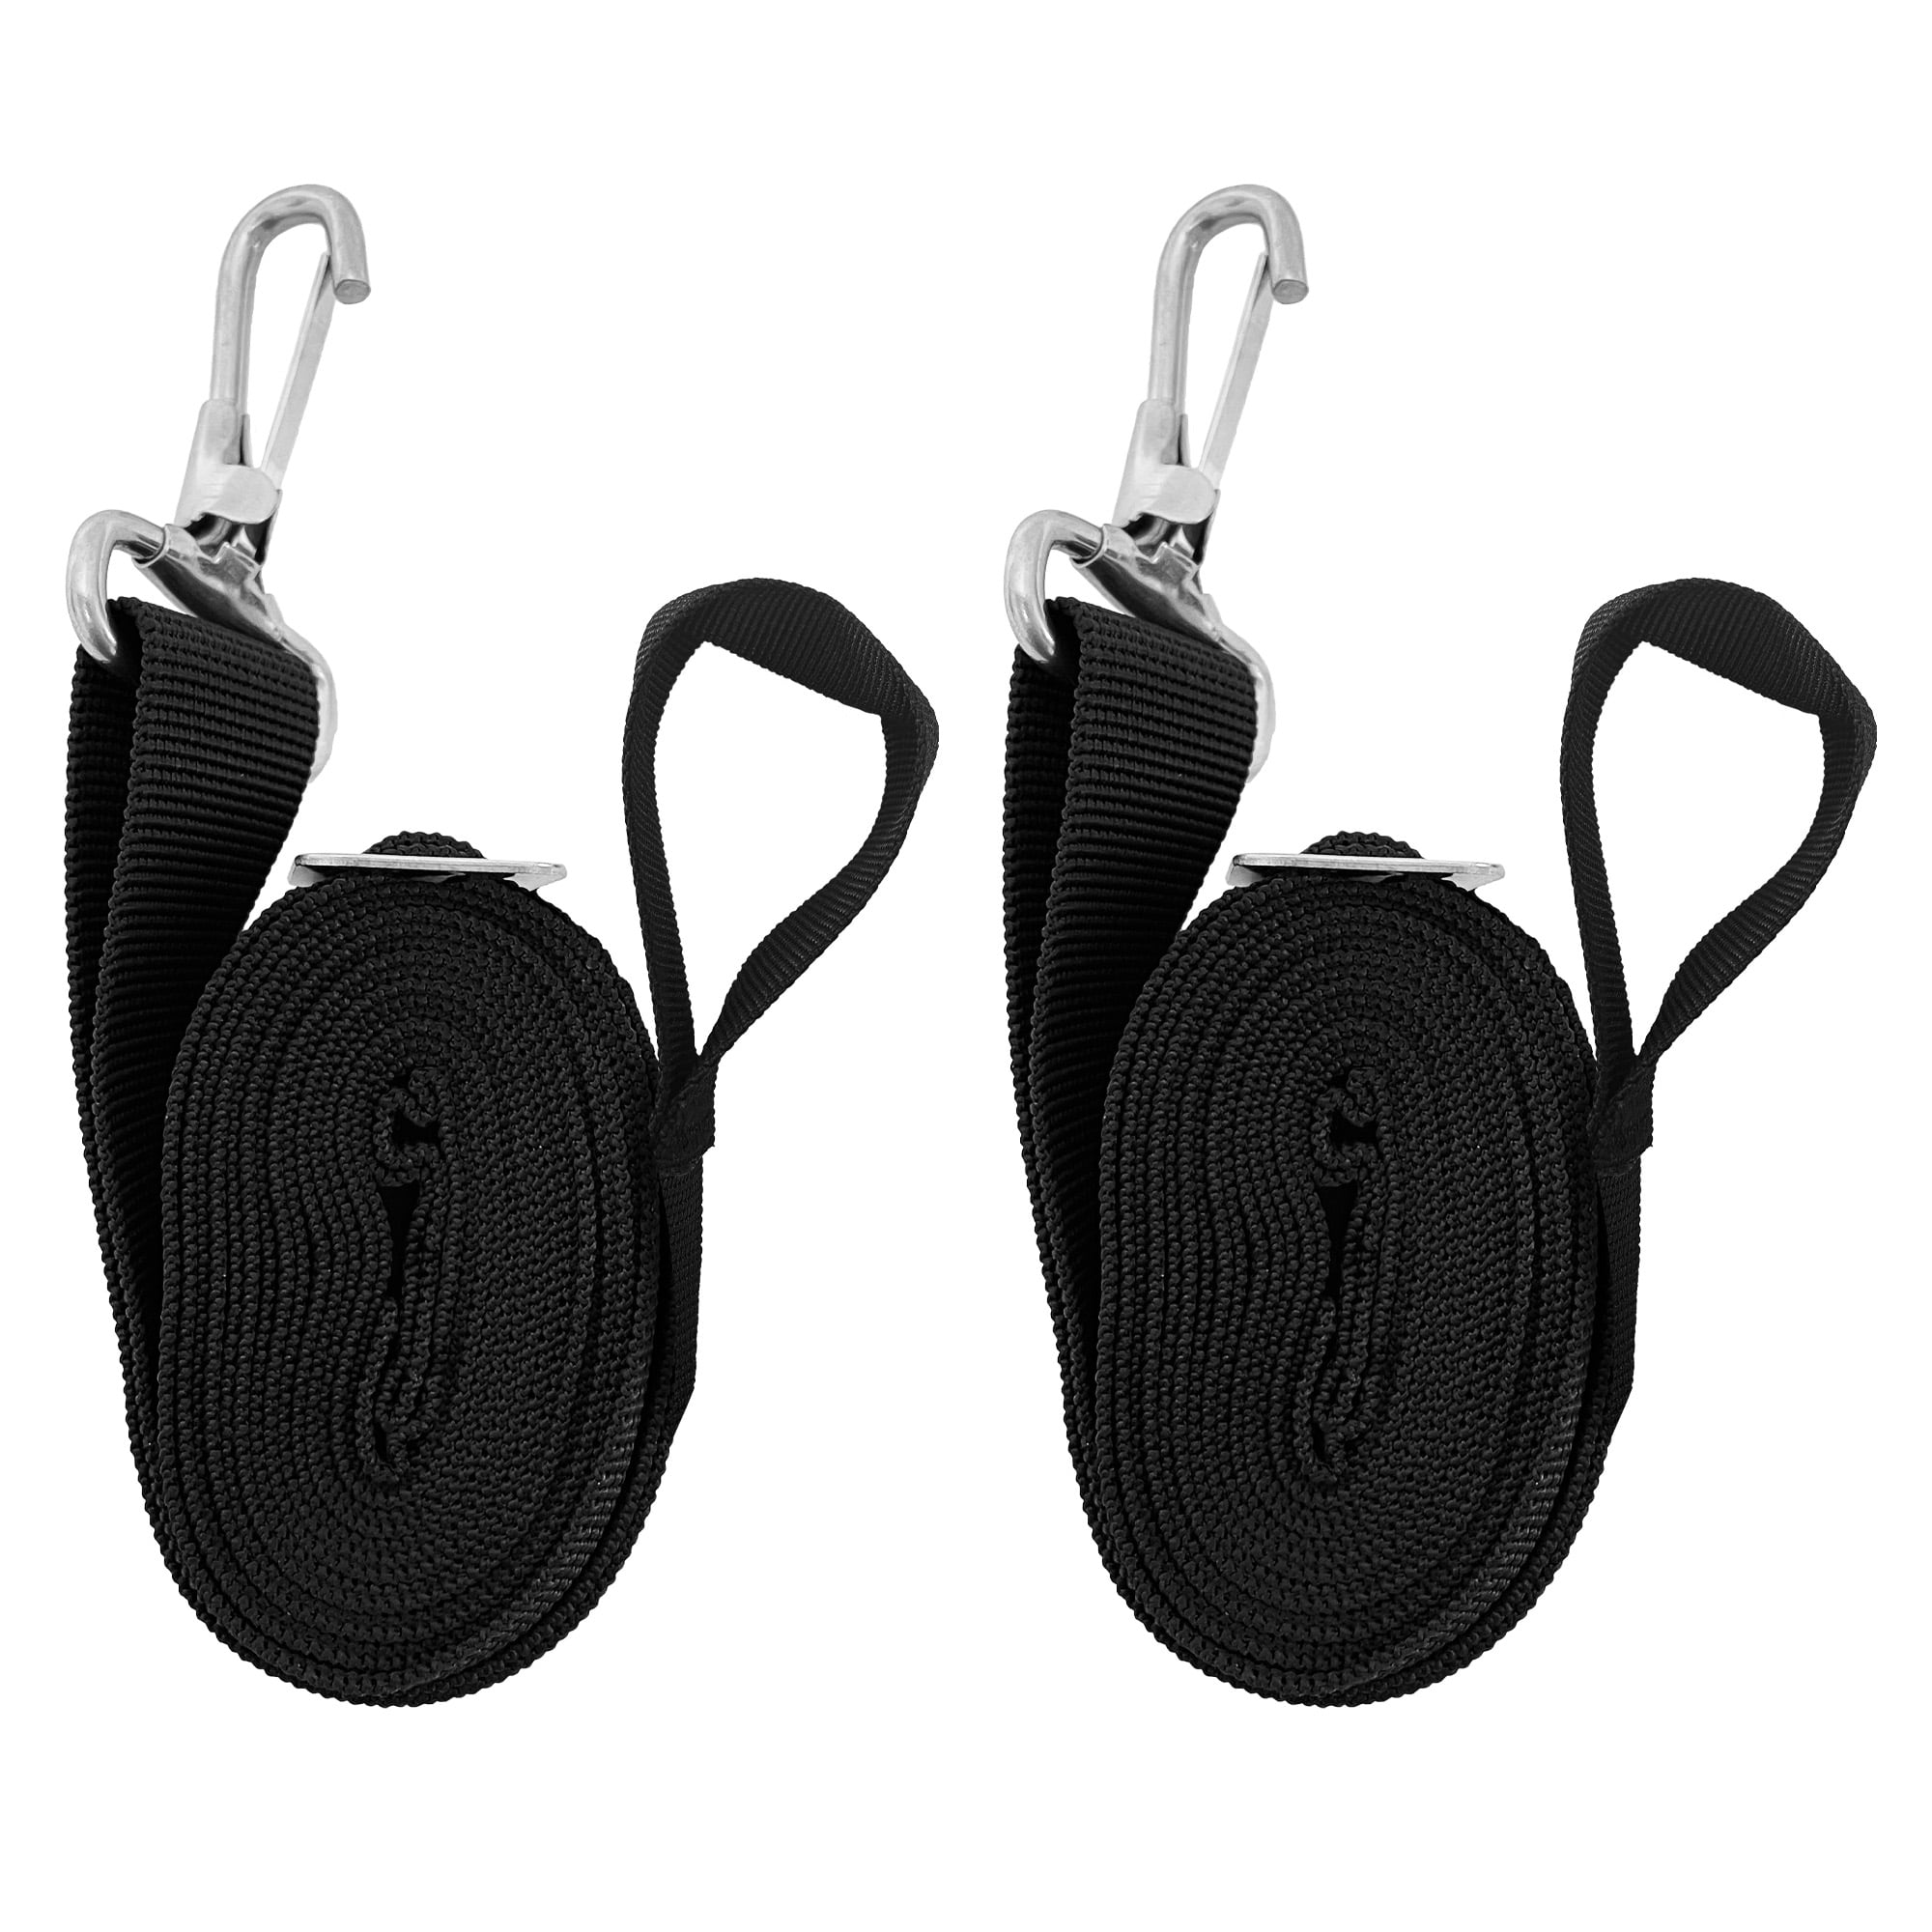 Percare 4 Pcs Adjustable Bimini Top Straps Black, Marine Tension Tie Down Webbing Straps with Loop Snap Hooks + Pad Eye Straps,28~60 Stainless Steel